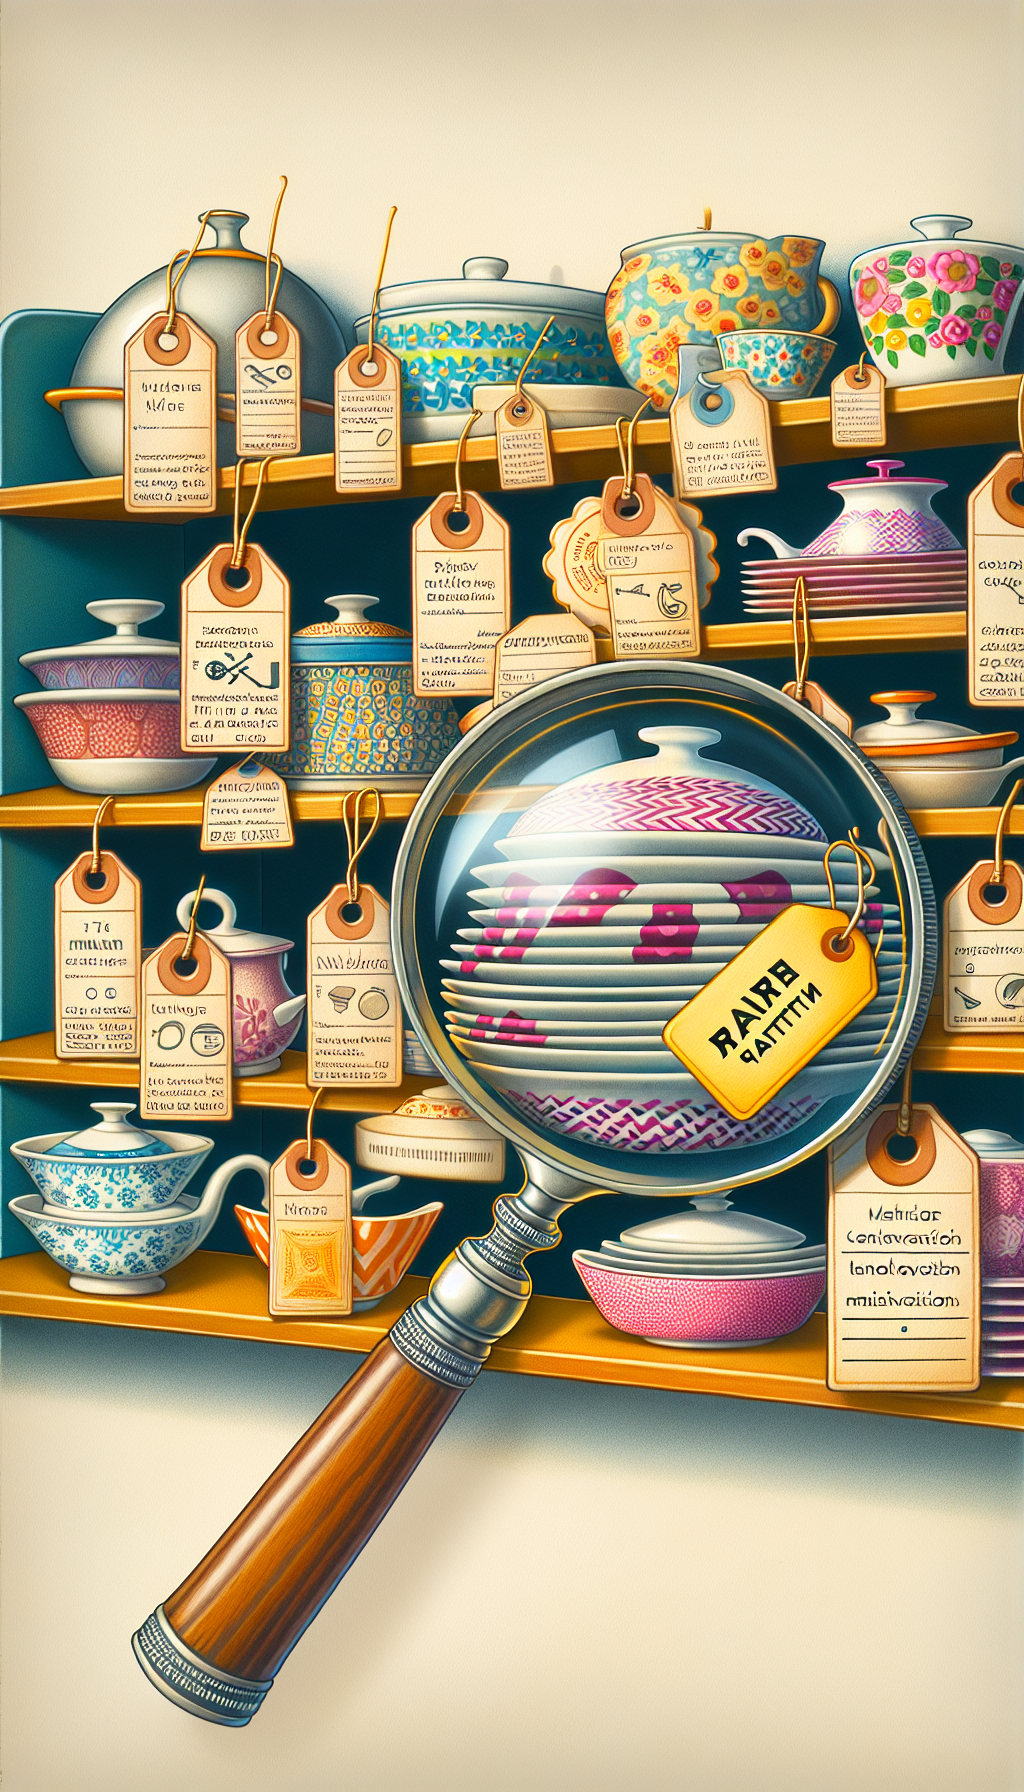 A whimsical illustration of a kitchen shelf holding an array of vintage CorningWare pieces, labeled meticulously with the 'rare pattern' identifiers. A retro-style magnifying glass hovers over, spotlighting a particularly rare piece. The shelf is adorned with small tags offering care tips like "handwash only," creating a fusion of preservation advice and pattern recognition in a charming, colorful vignette.